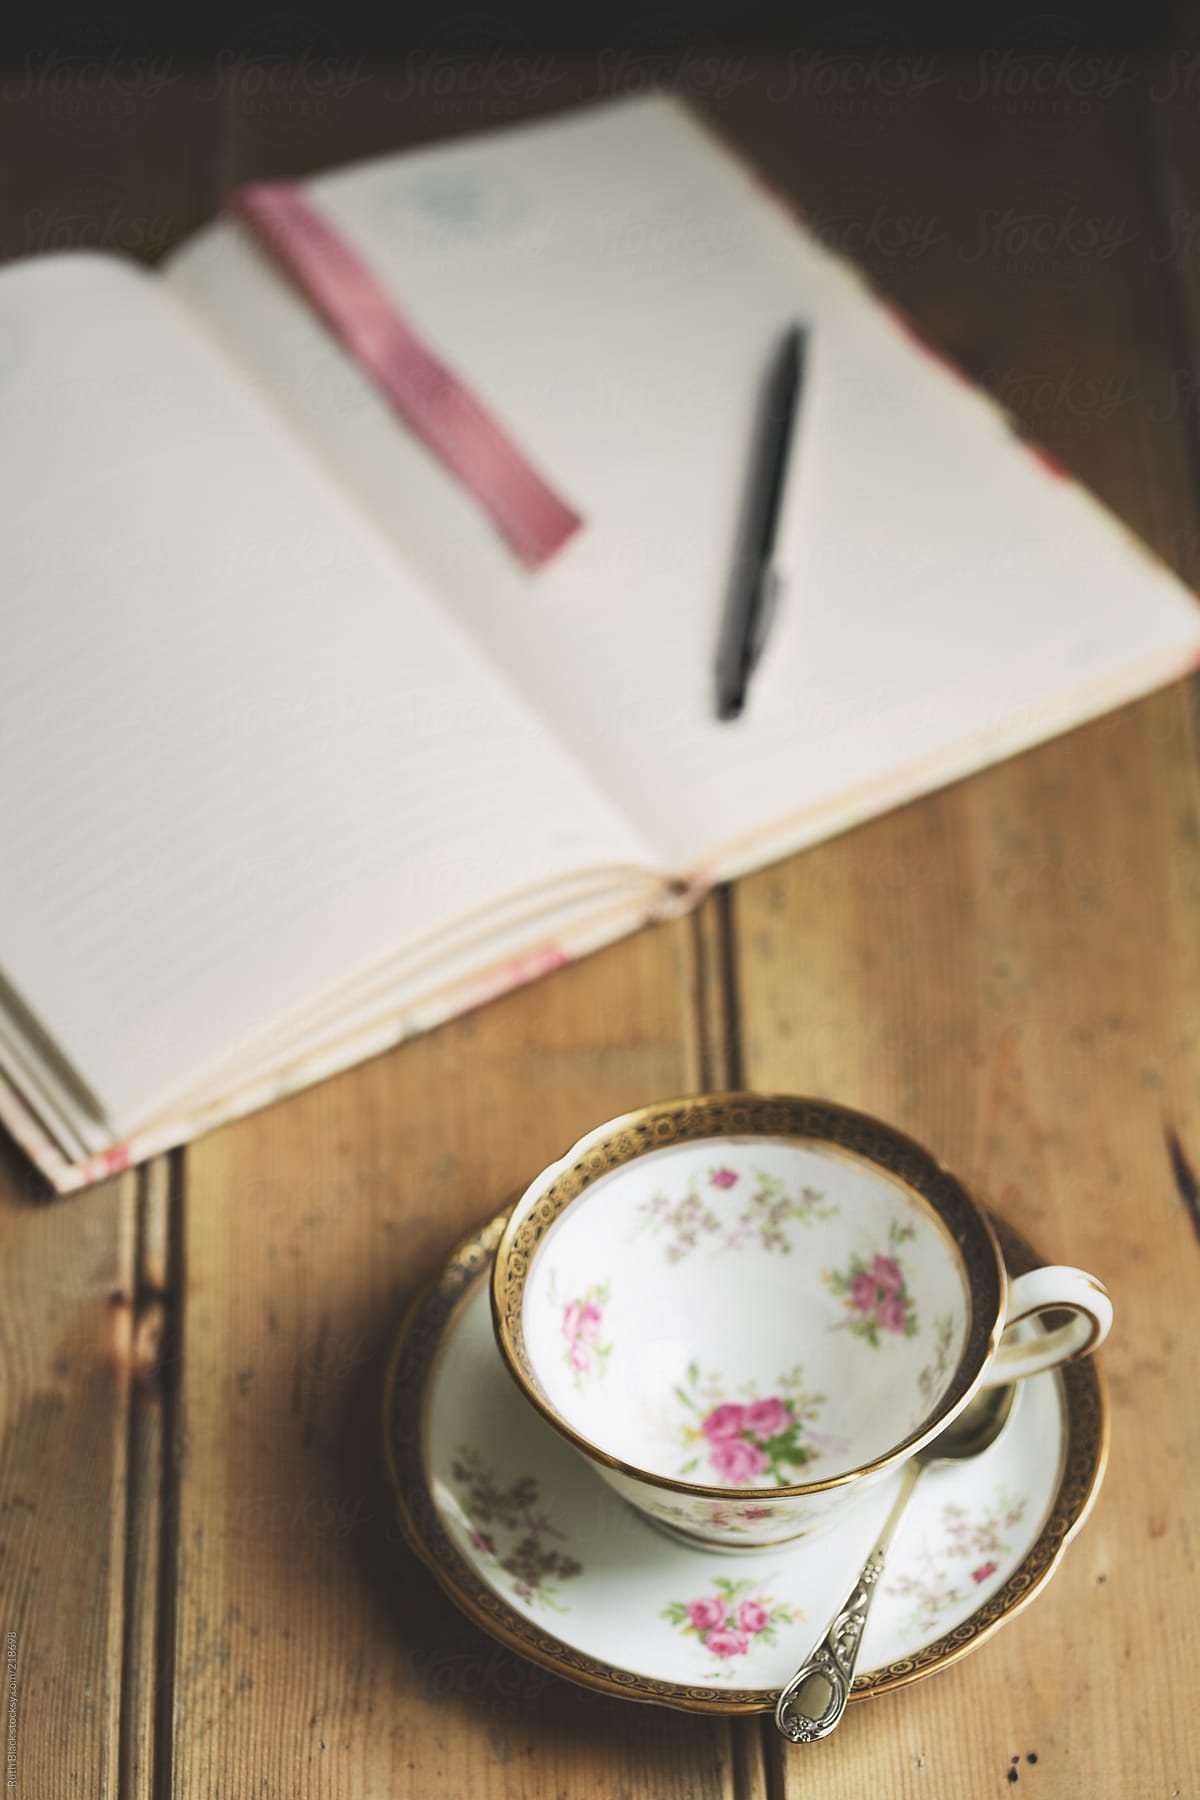 Open journal with vintage floral teacup